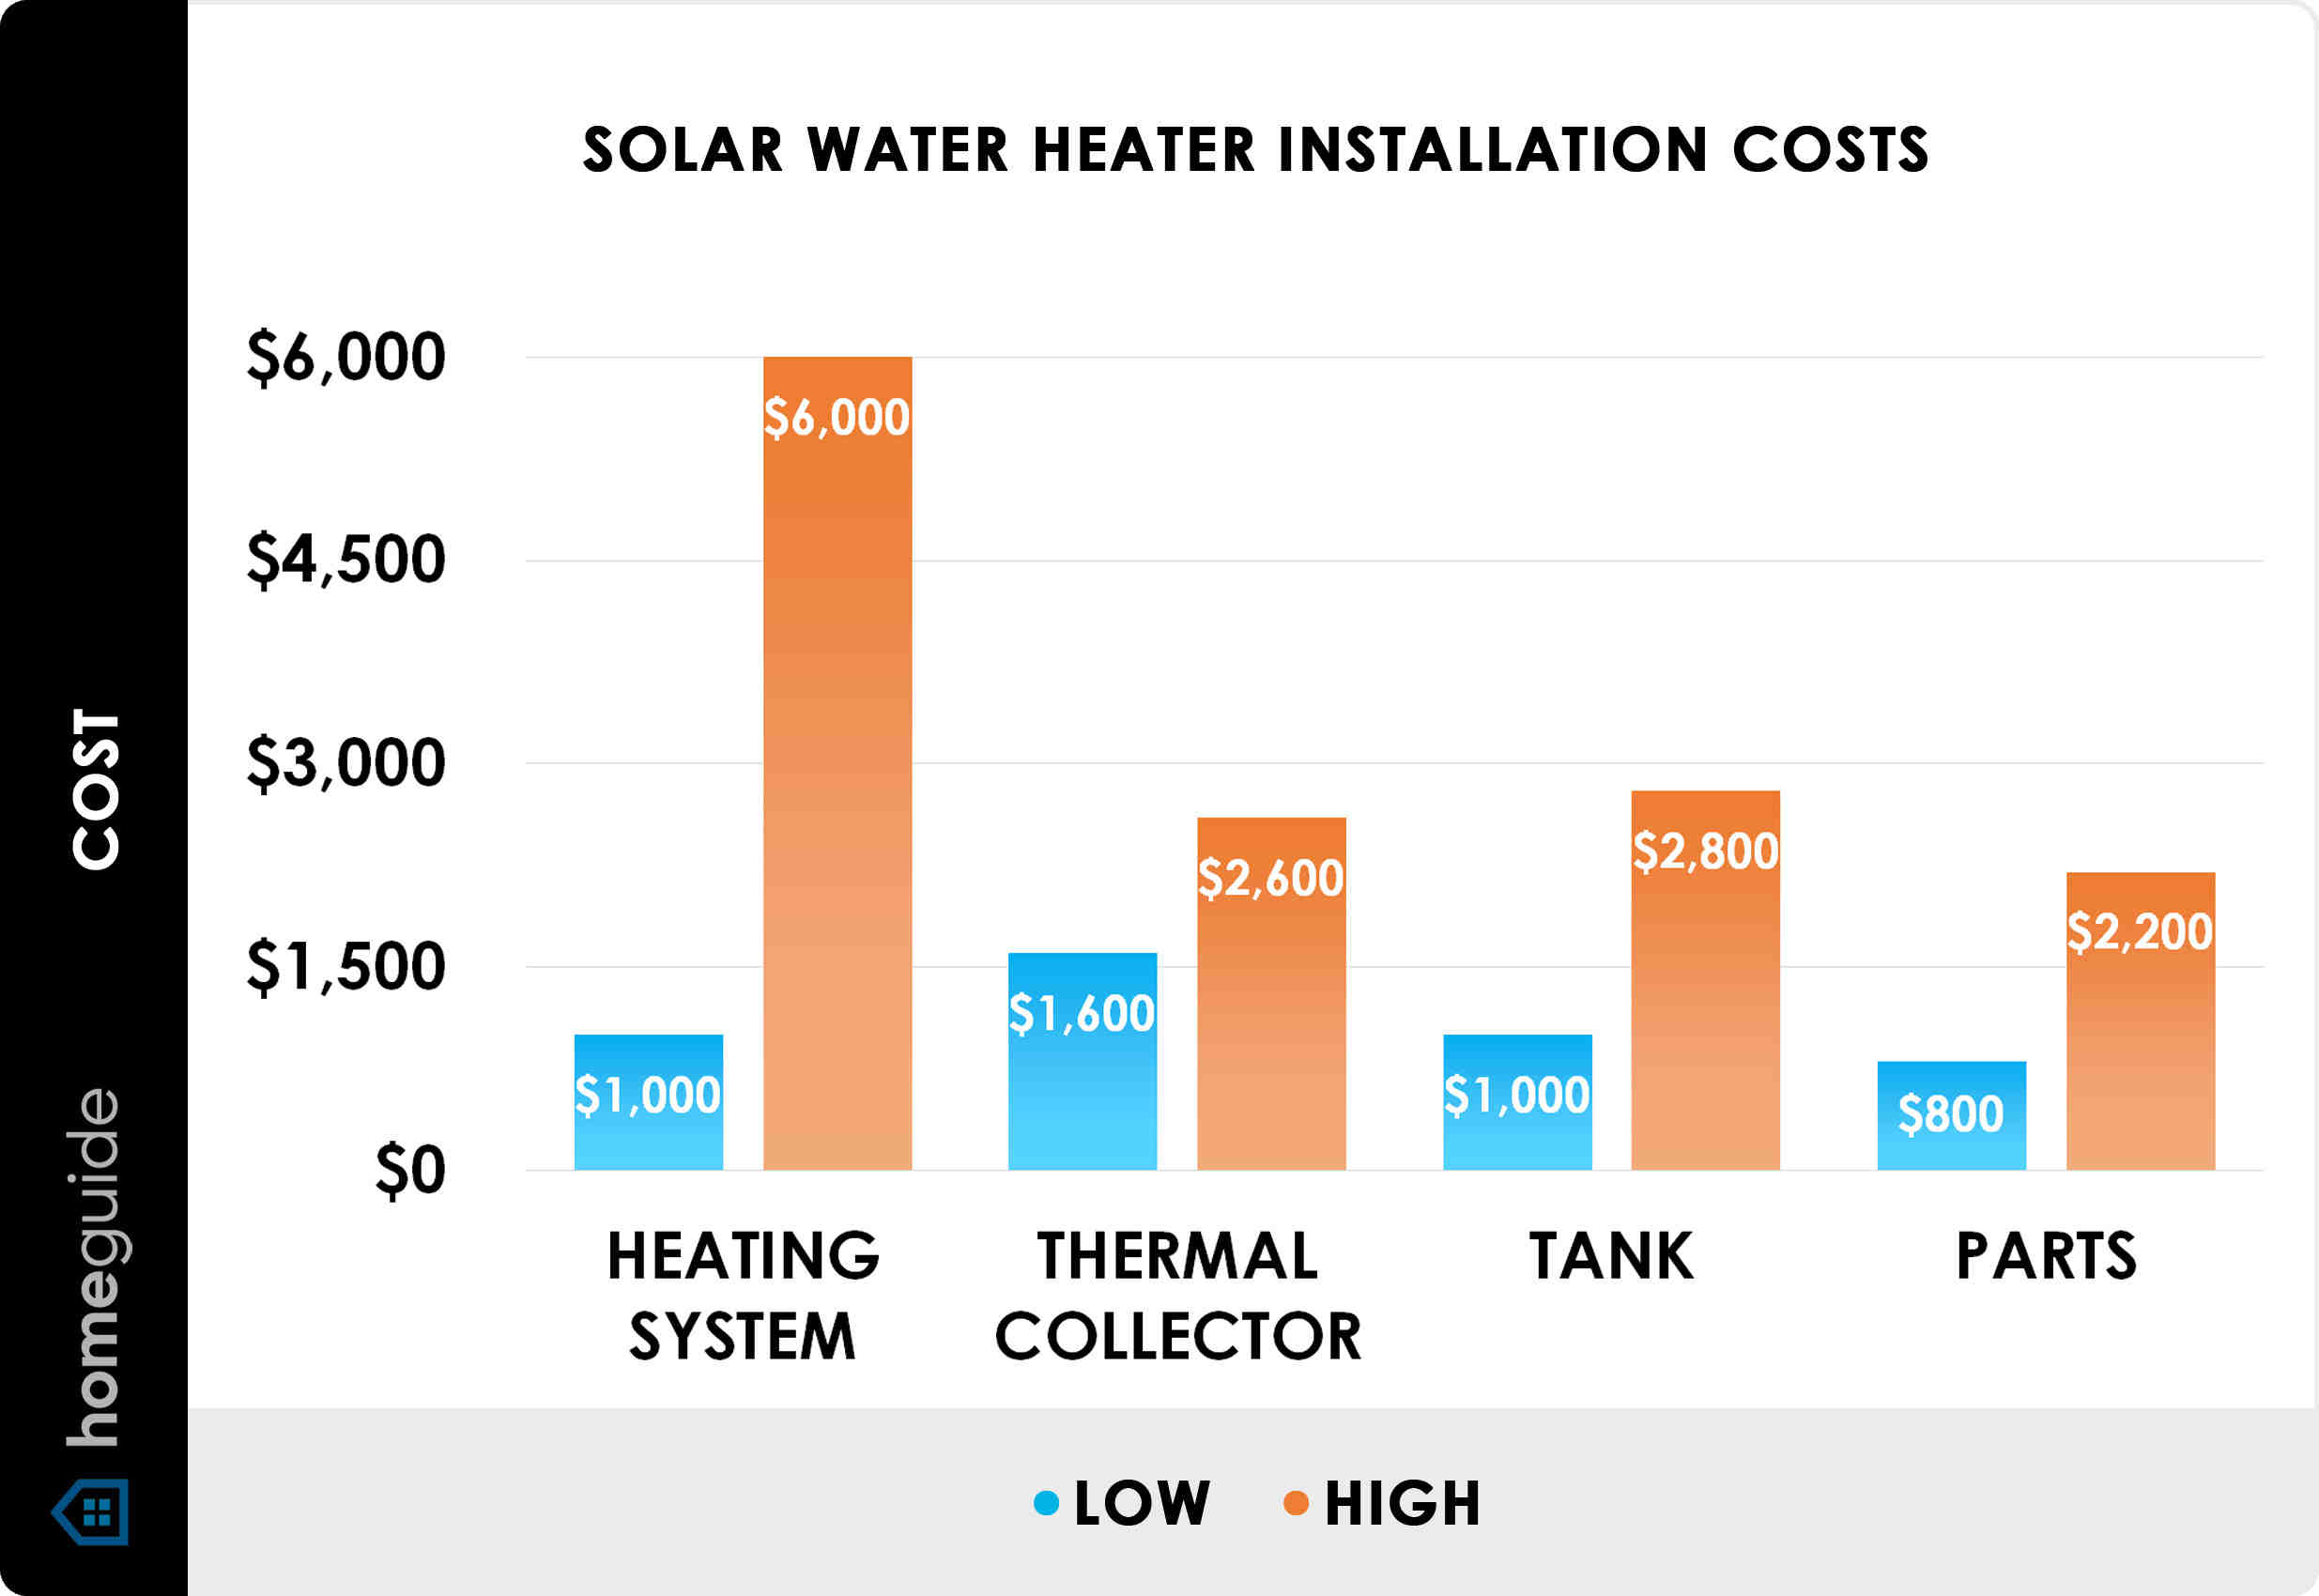 How expensive are solar water heaters?